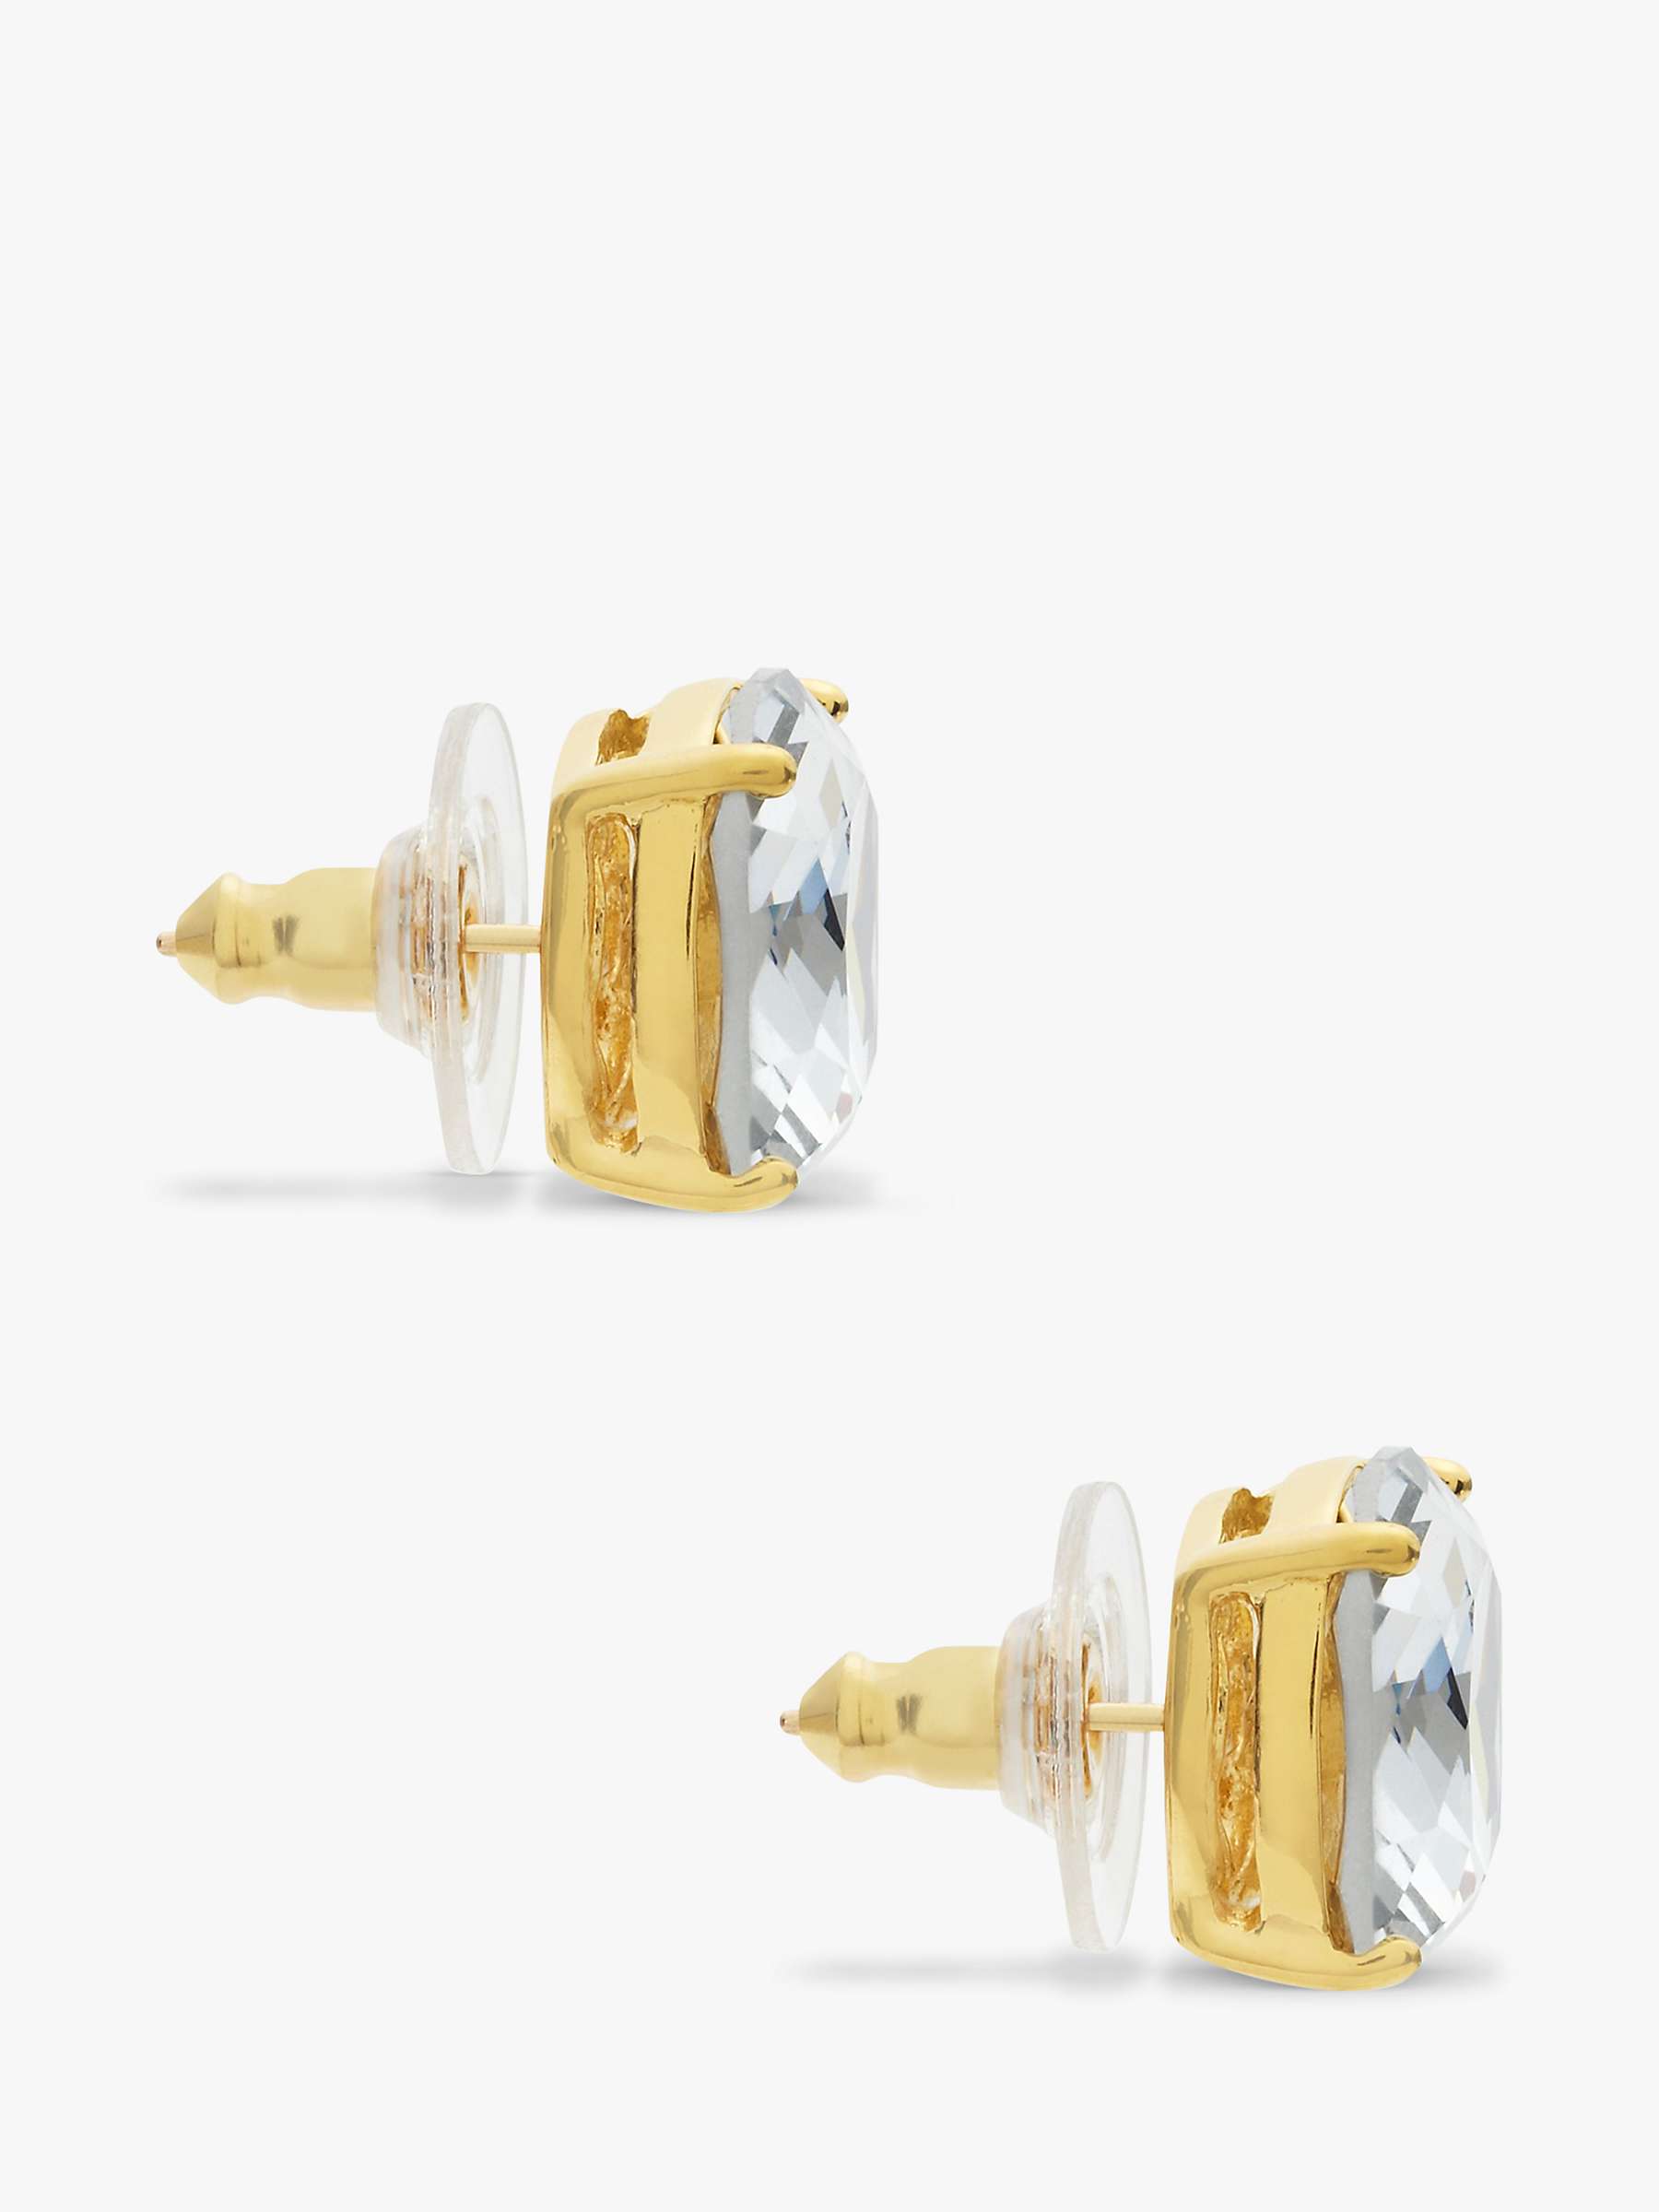 Buy kate spade new york Glass Square Stud Earrings, Gold/Clear Online at johnlewis.com